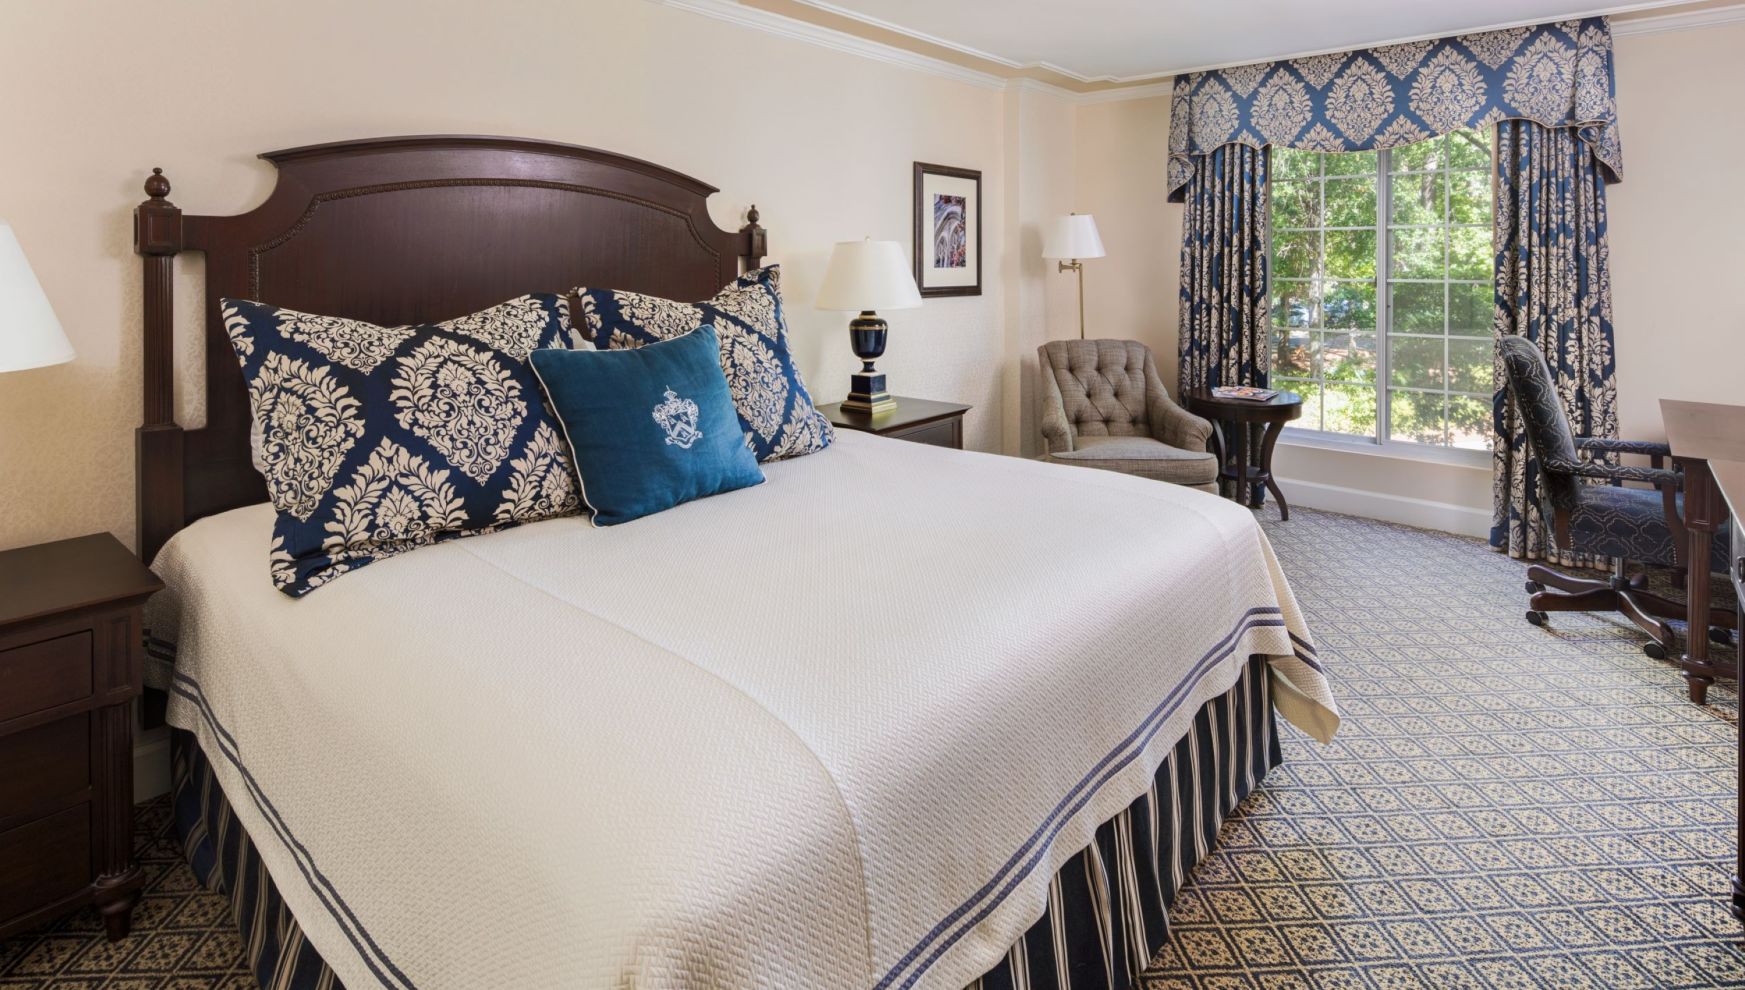 A Bed With Blue And White Pillows